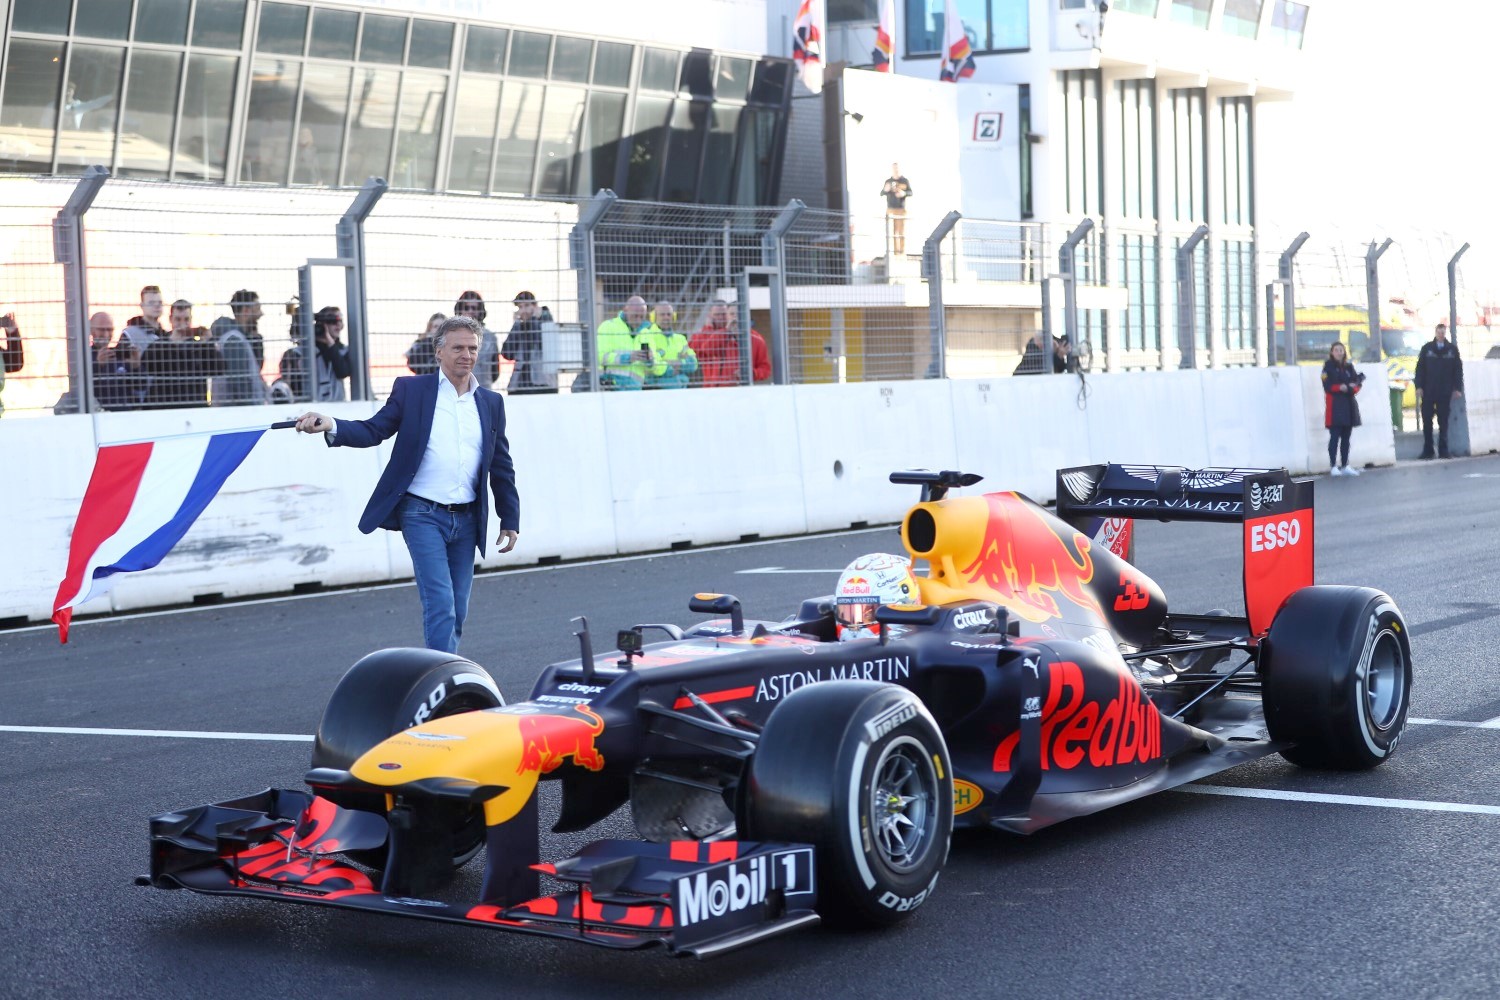 Max was not allowed to use the current Red Bull Honda